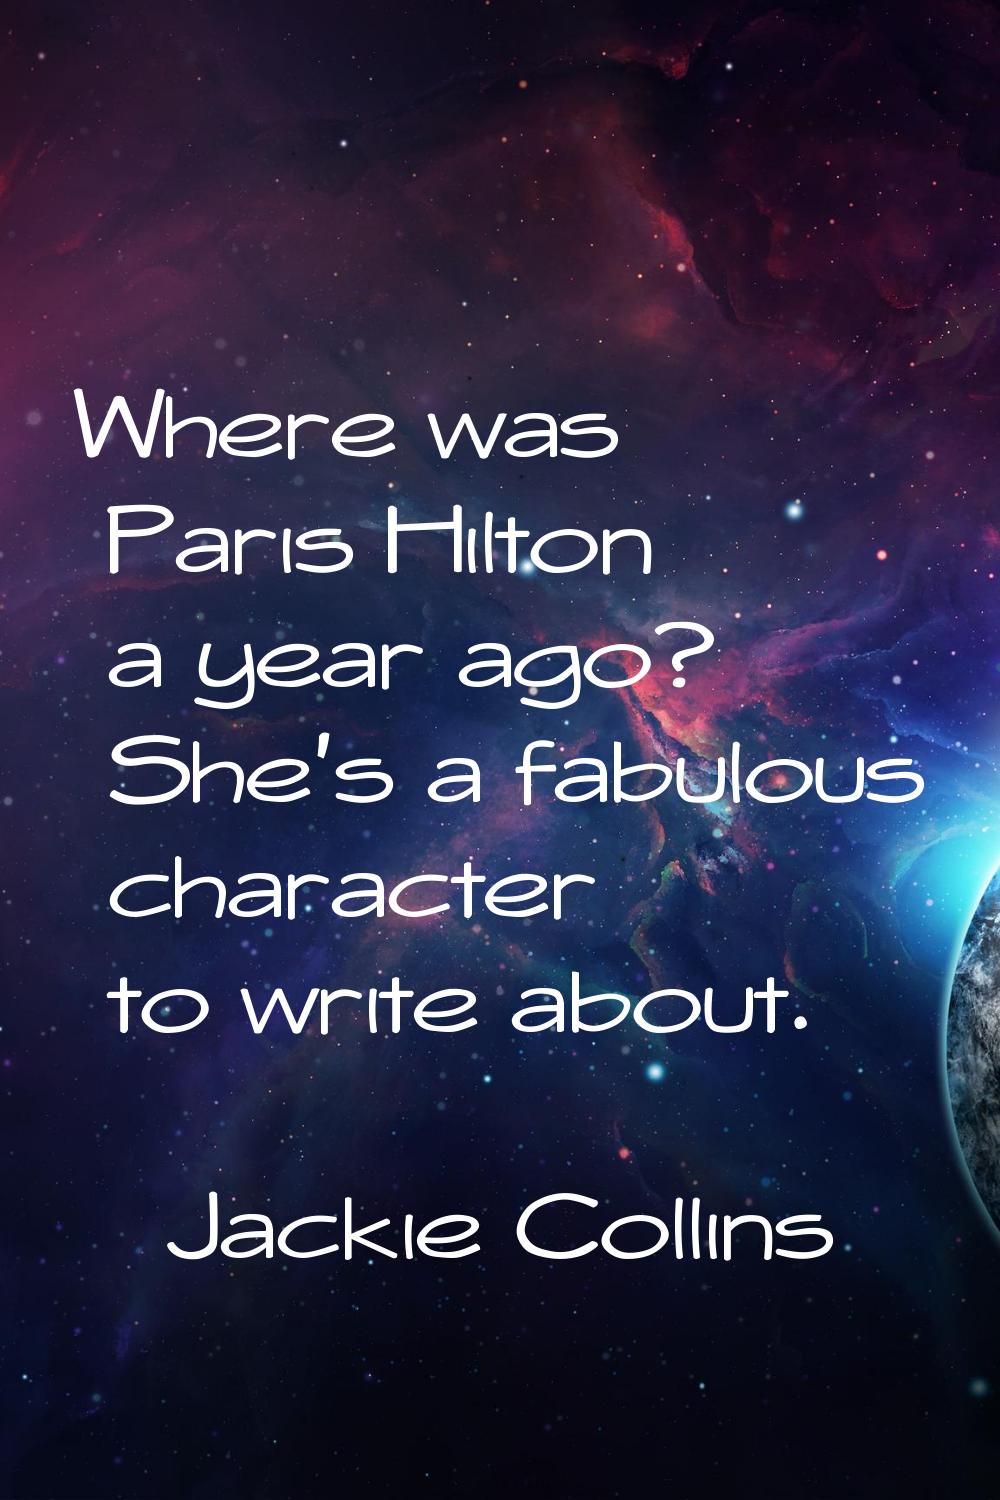 Where was Paris Hilton a year ago? She's a fabulous character to write about.